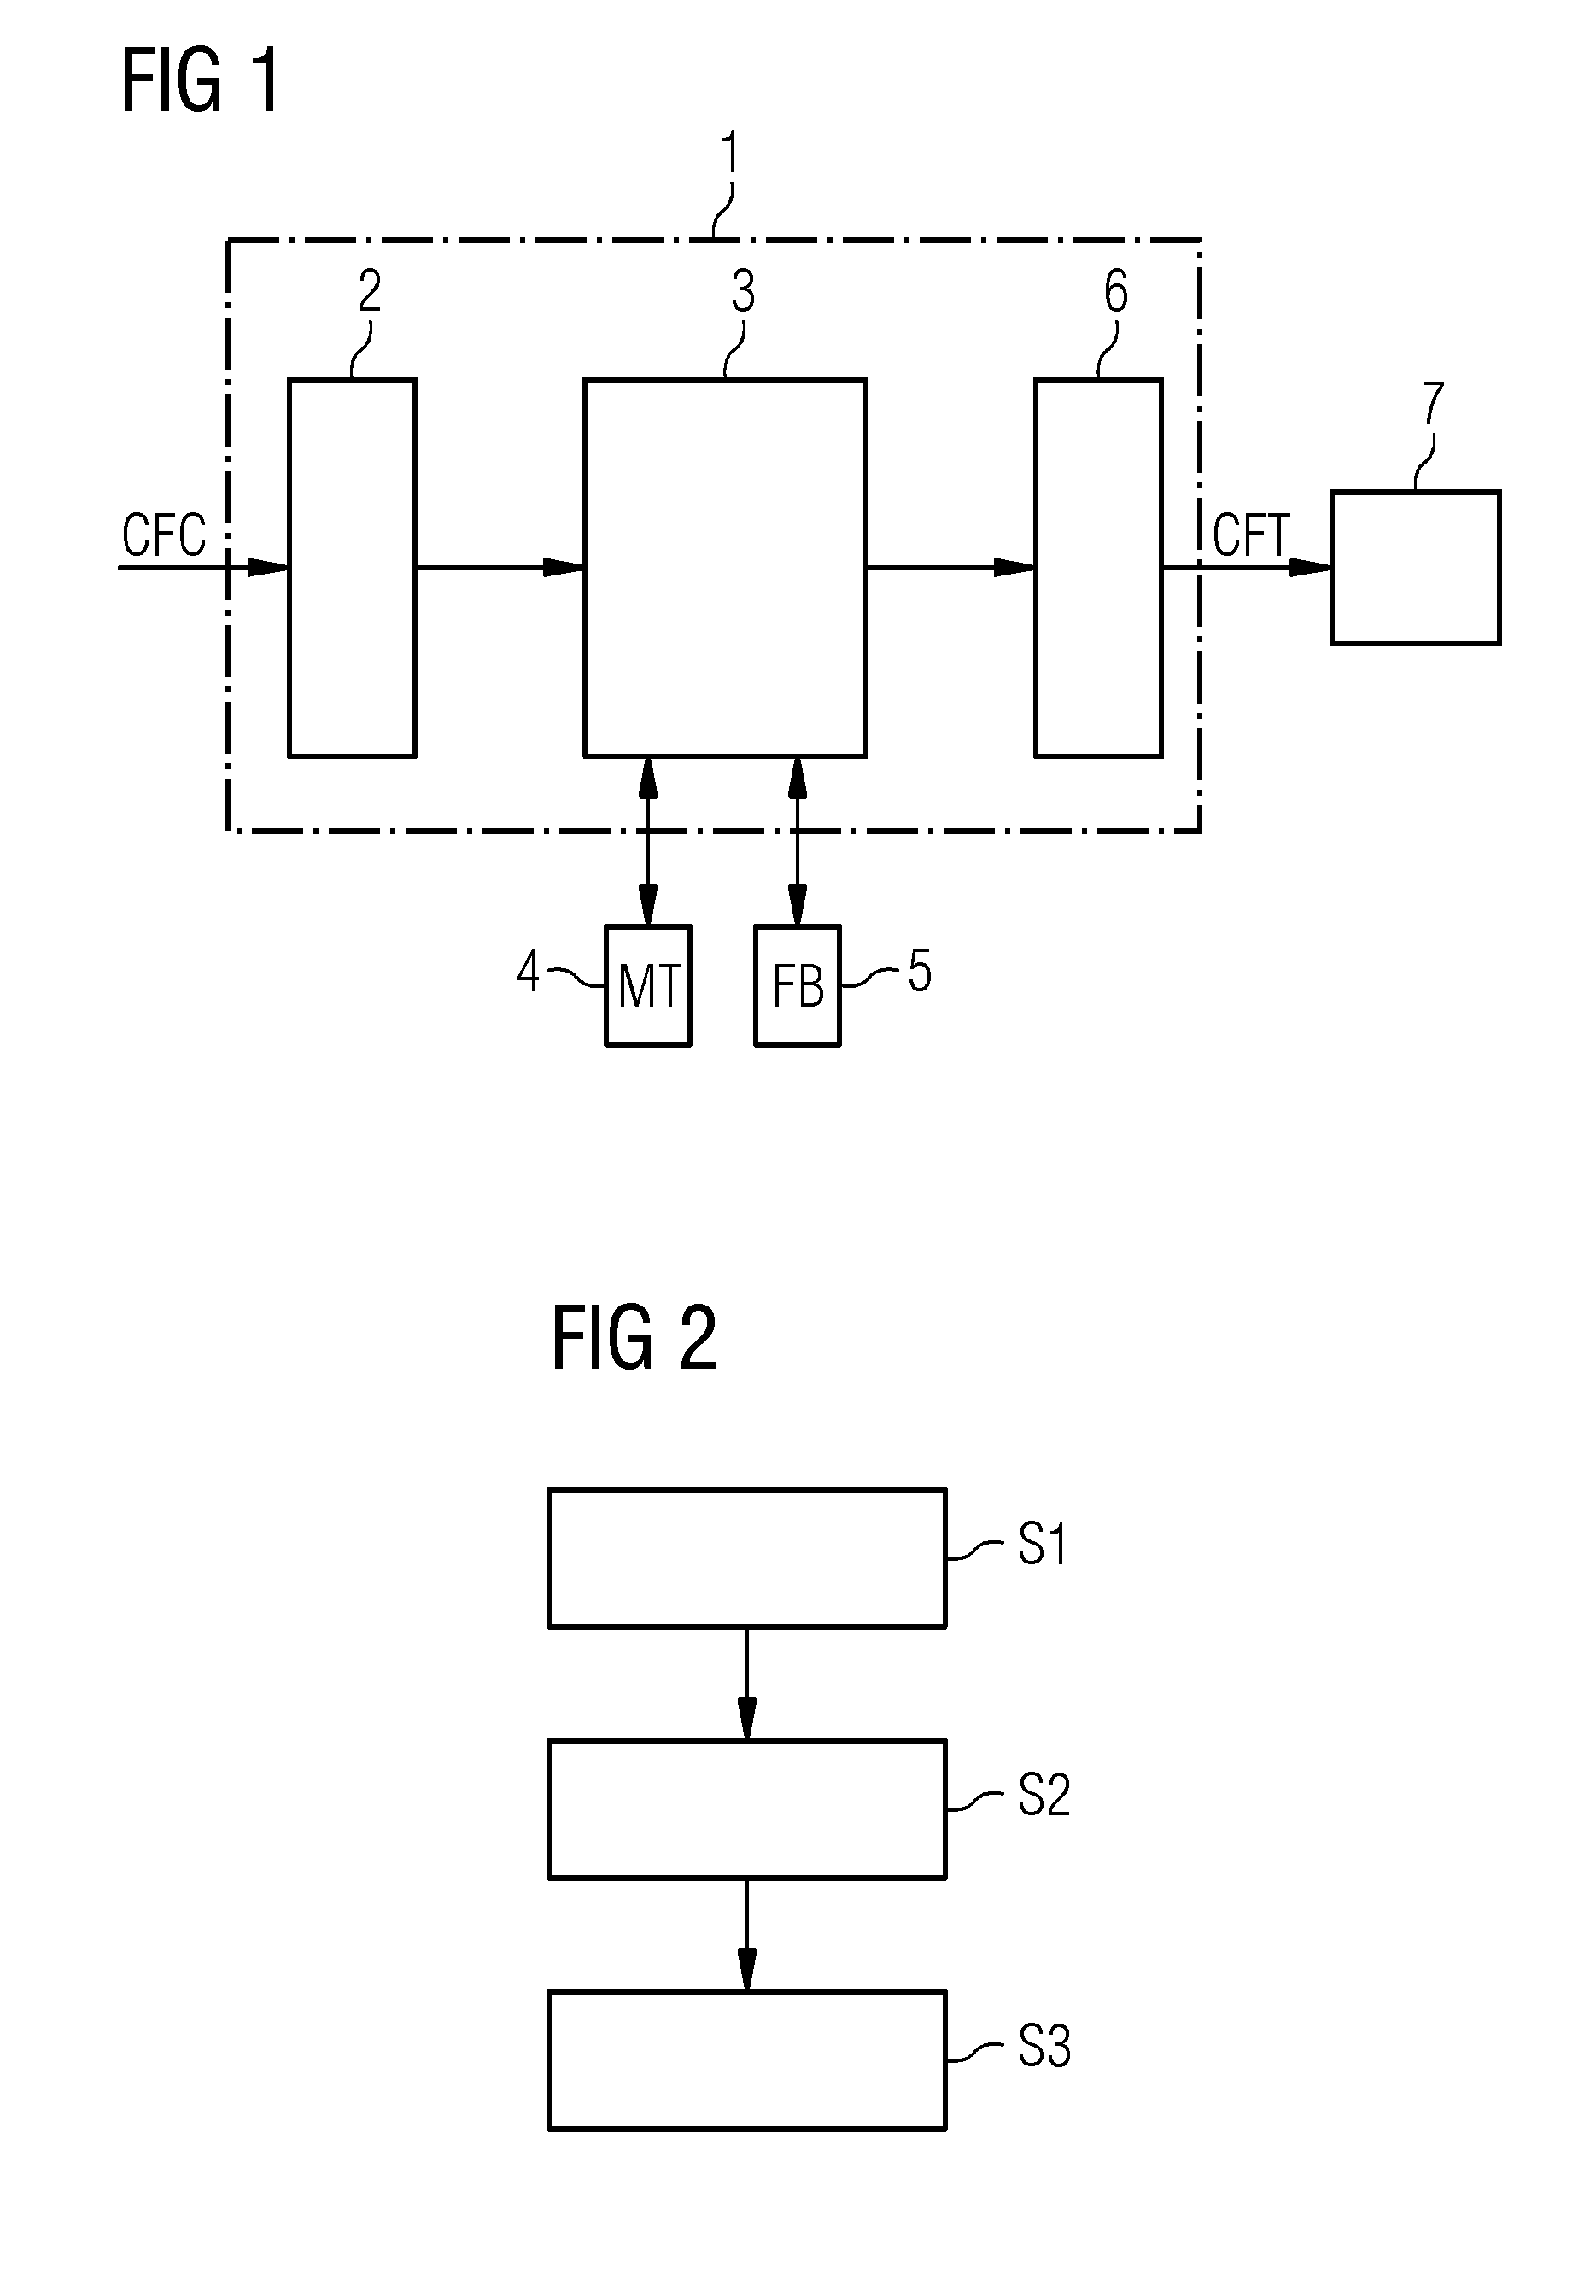 Method, device, and system for monitoring a security network interface unit